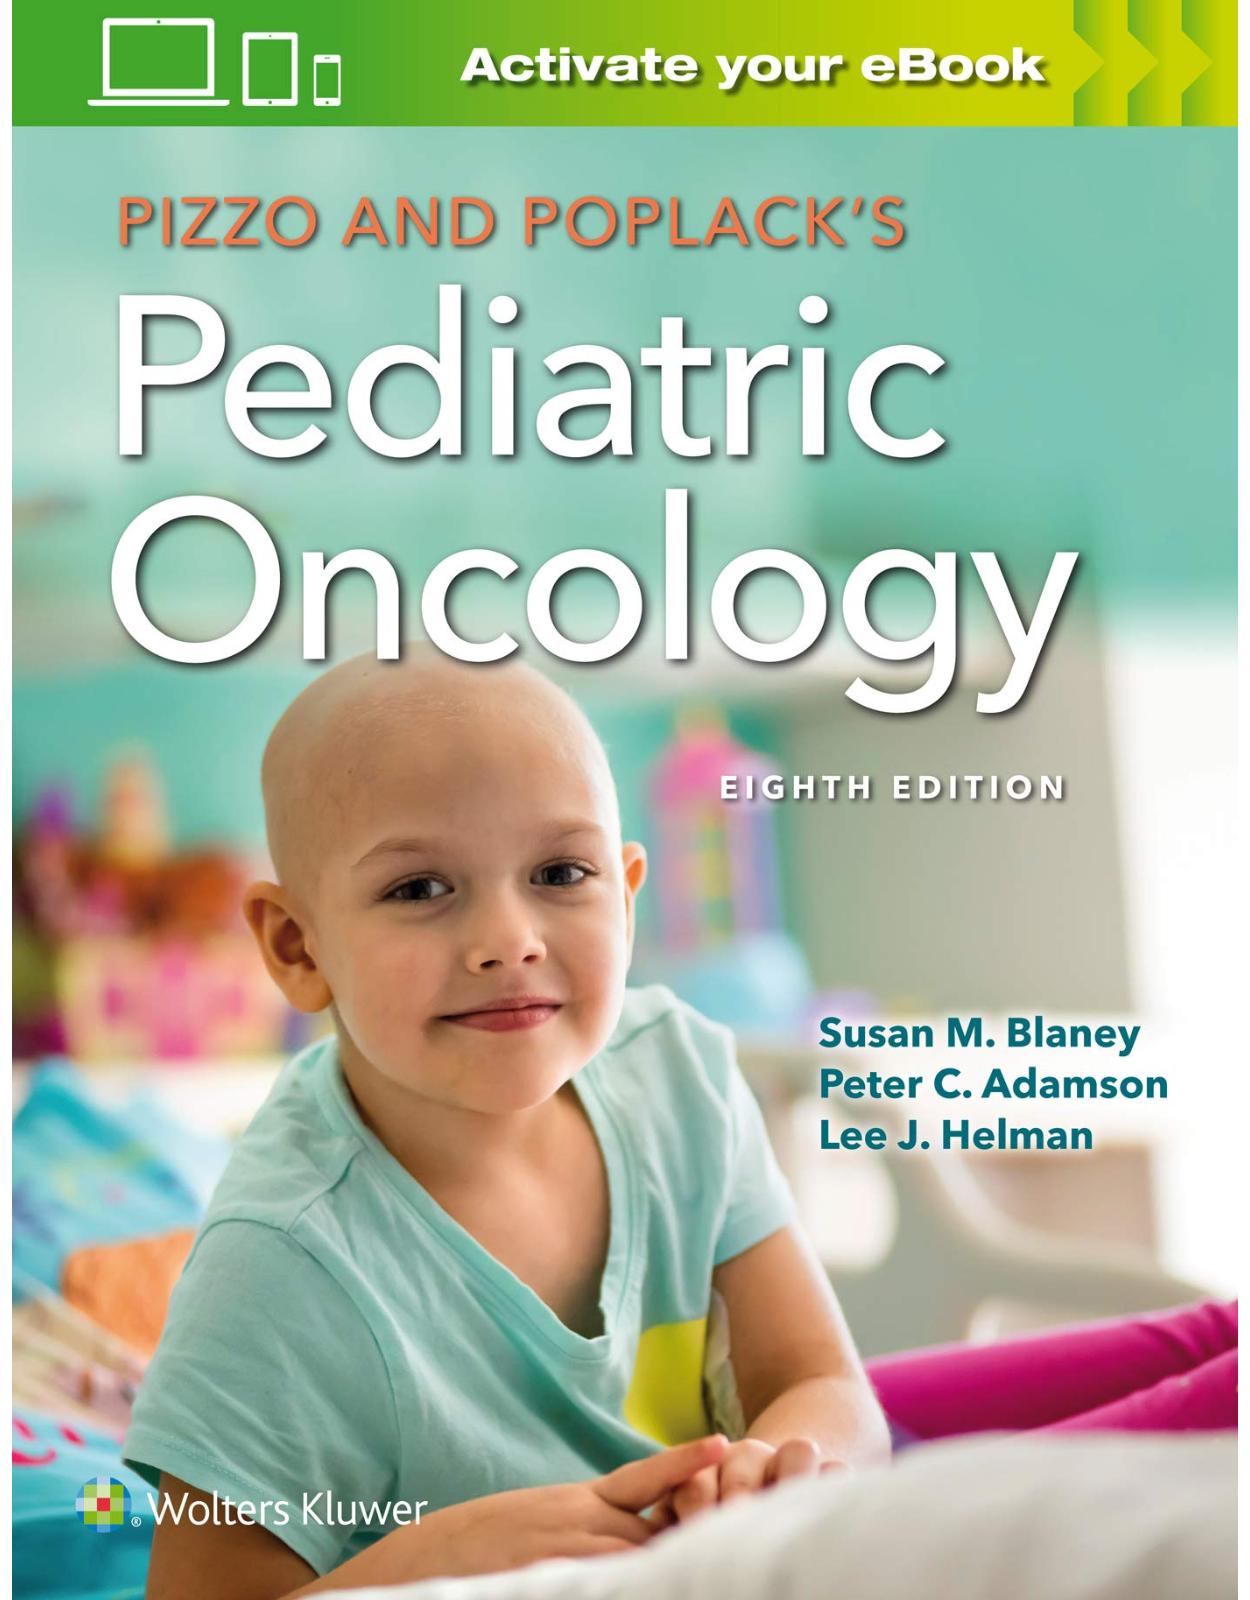 Pizzo & Poplack’s Pediatric Oncology, Eighth edition